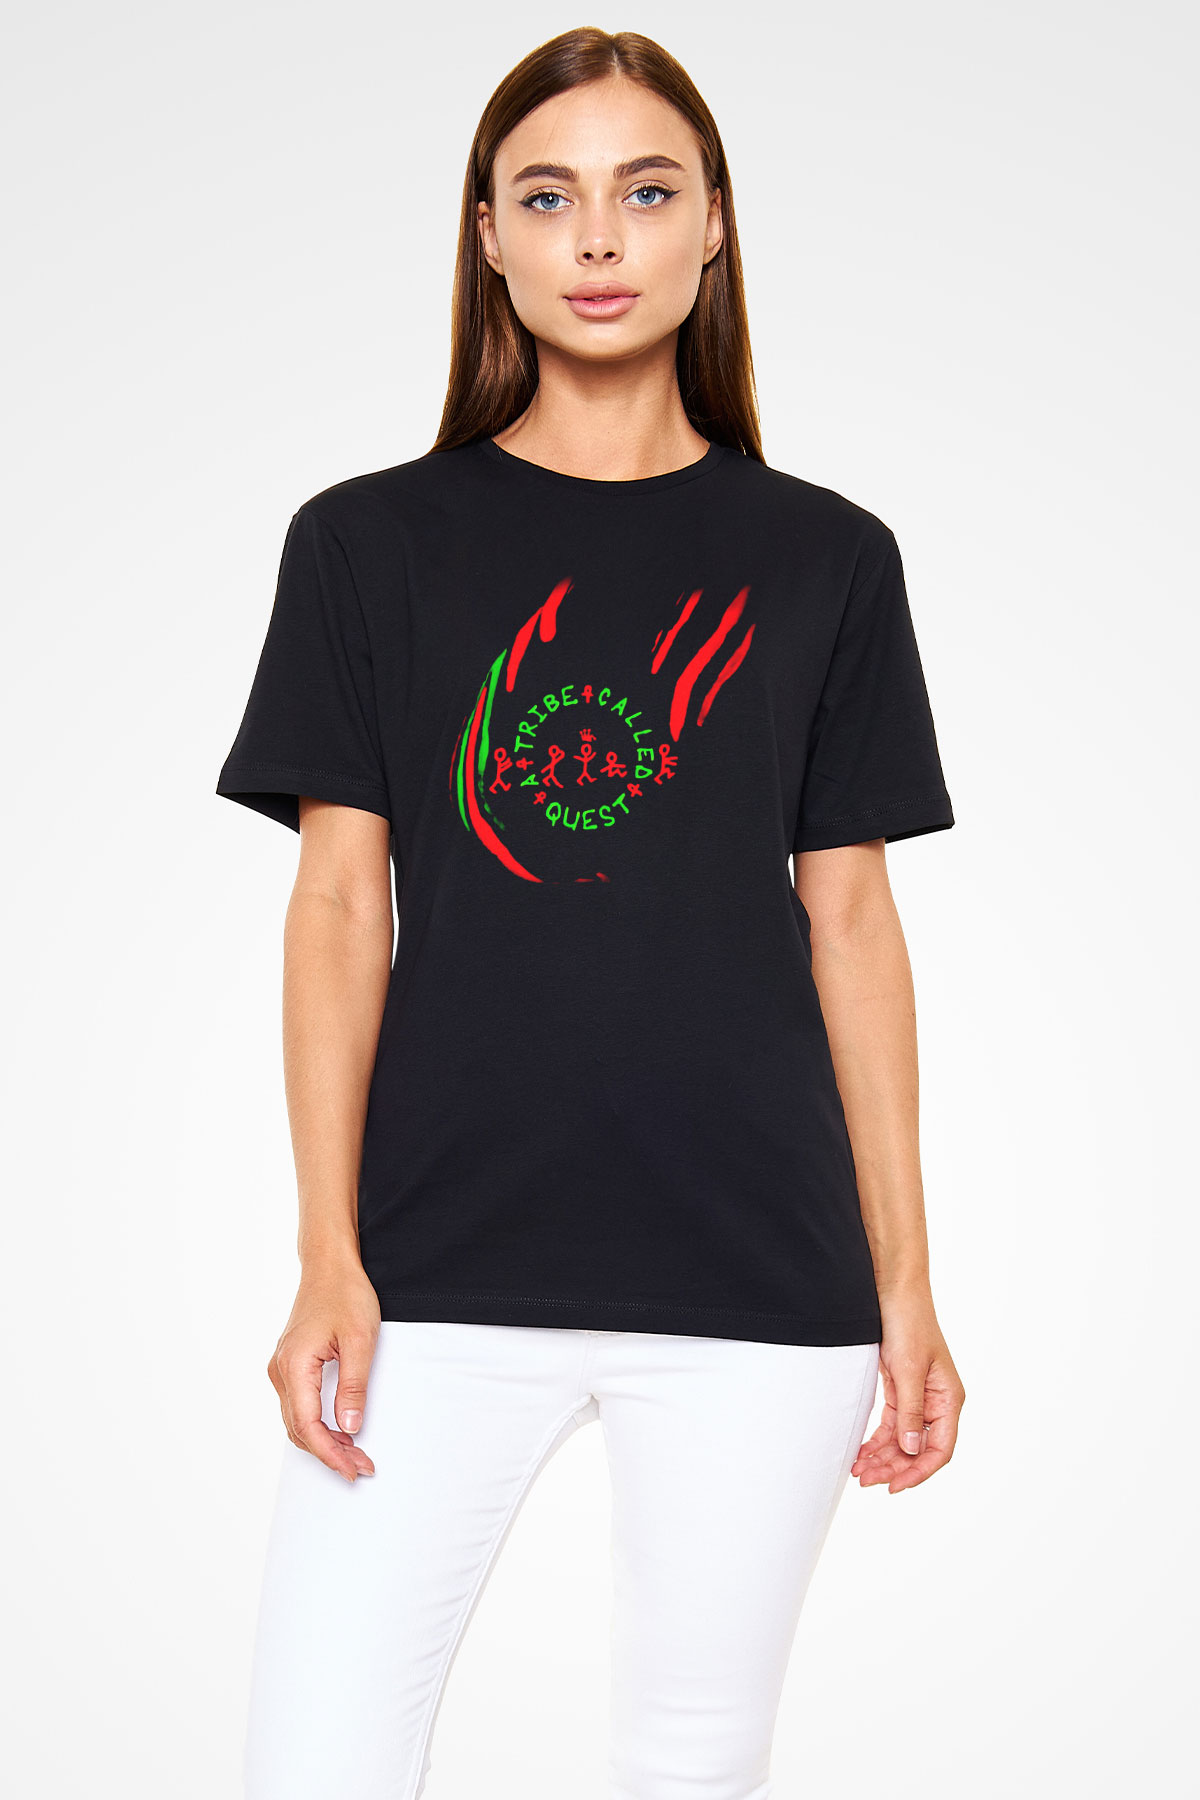 A Tribe Called Quest Black Unisex T-Shirt - Tees